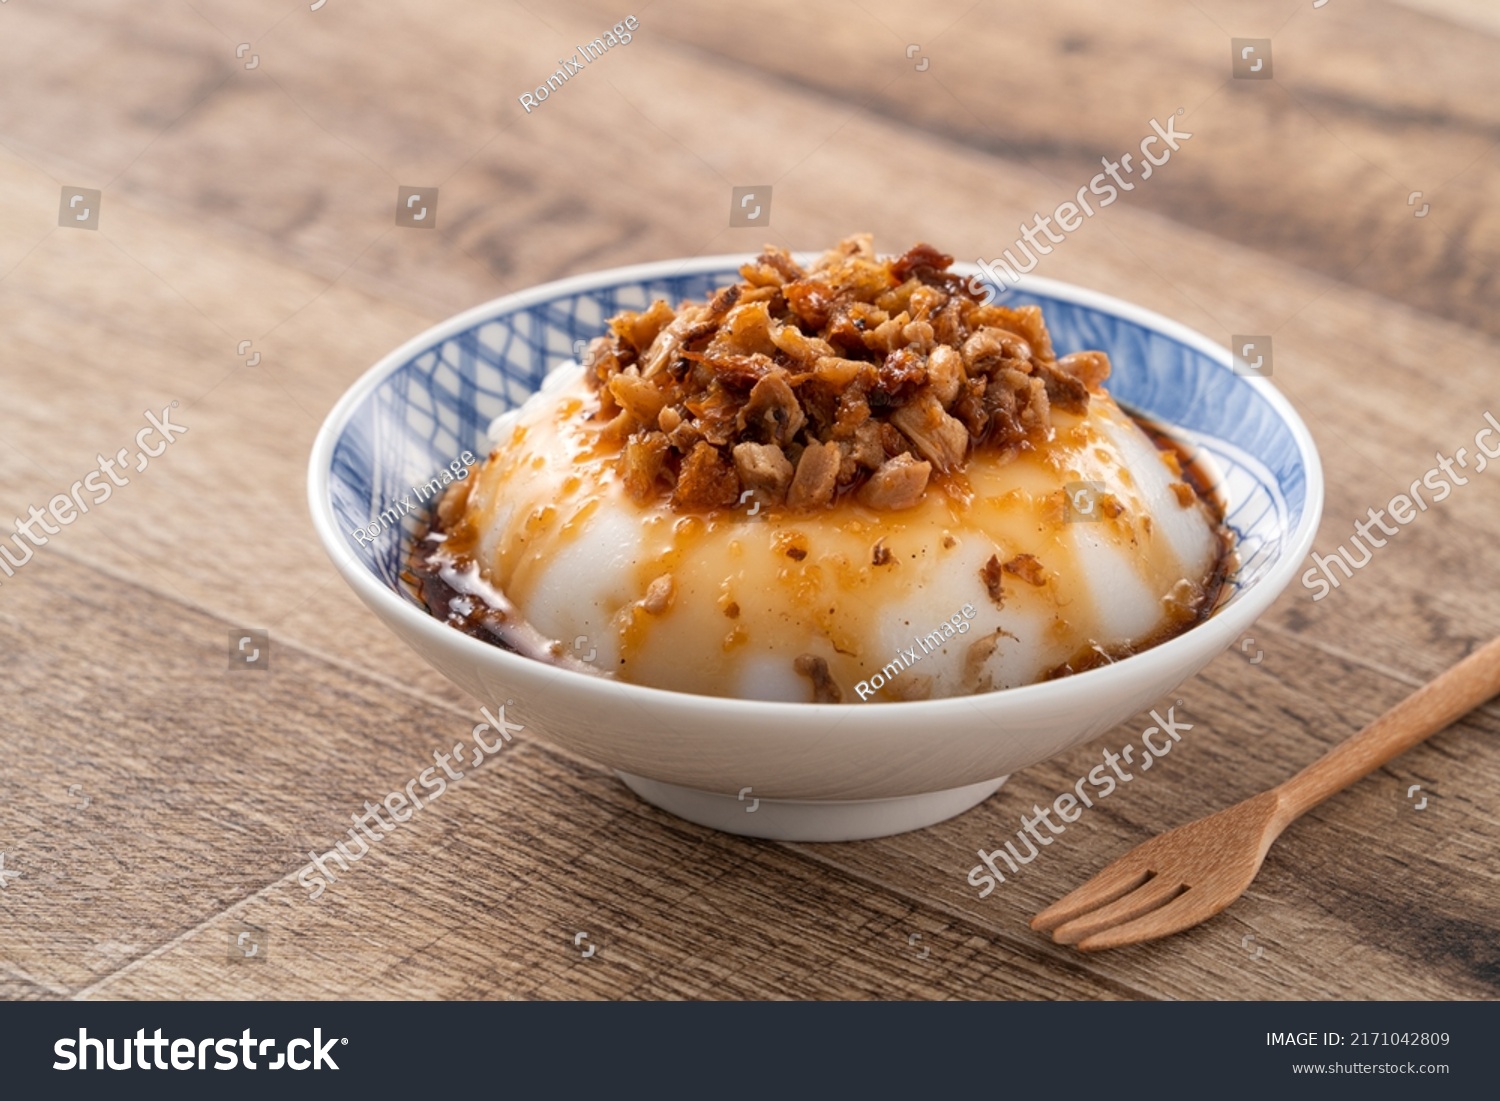 Taiwanese savory rice pudding Wa gui, rice cake with chopped dried radish topping and soy sauce in a bowl. #2171042809